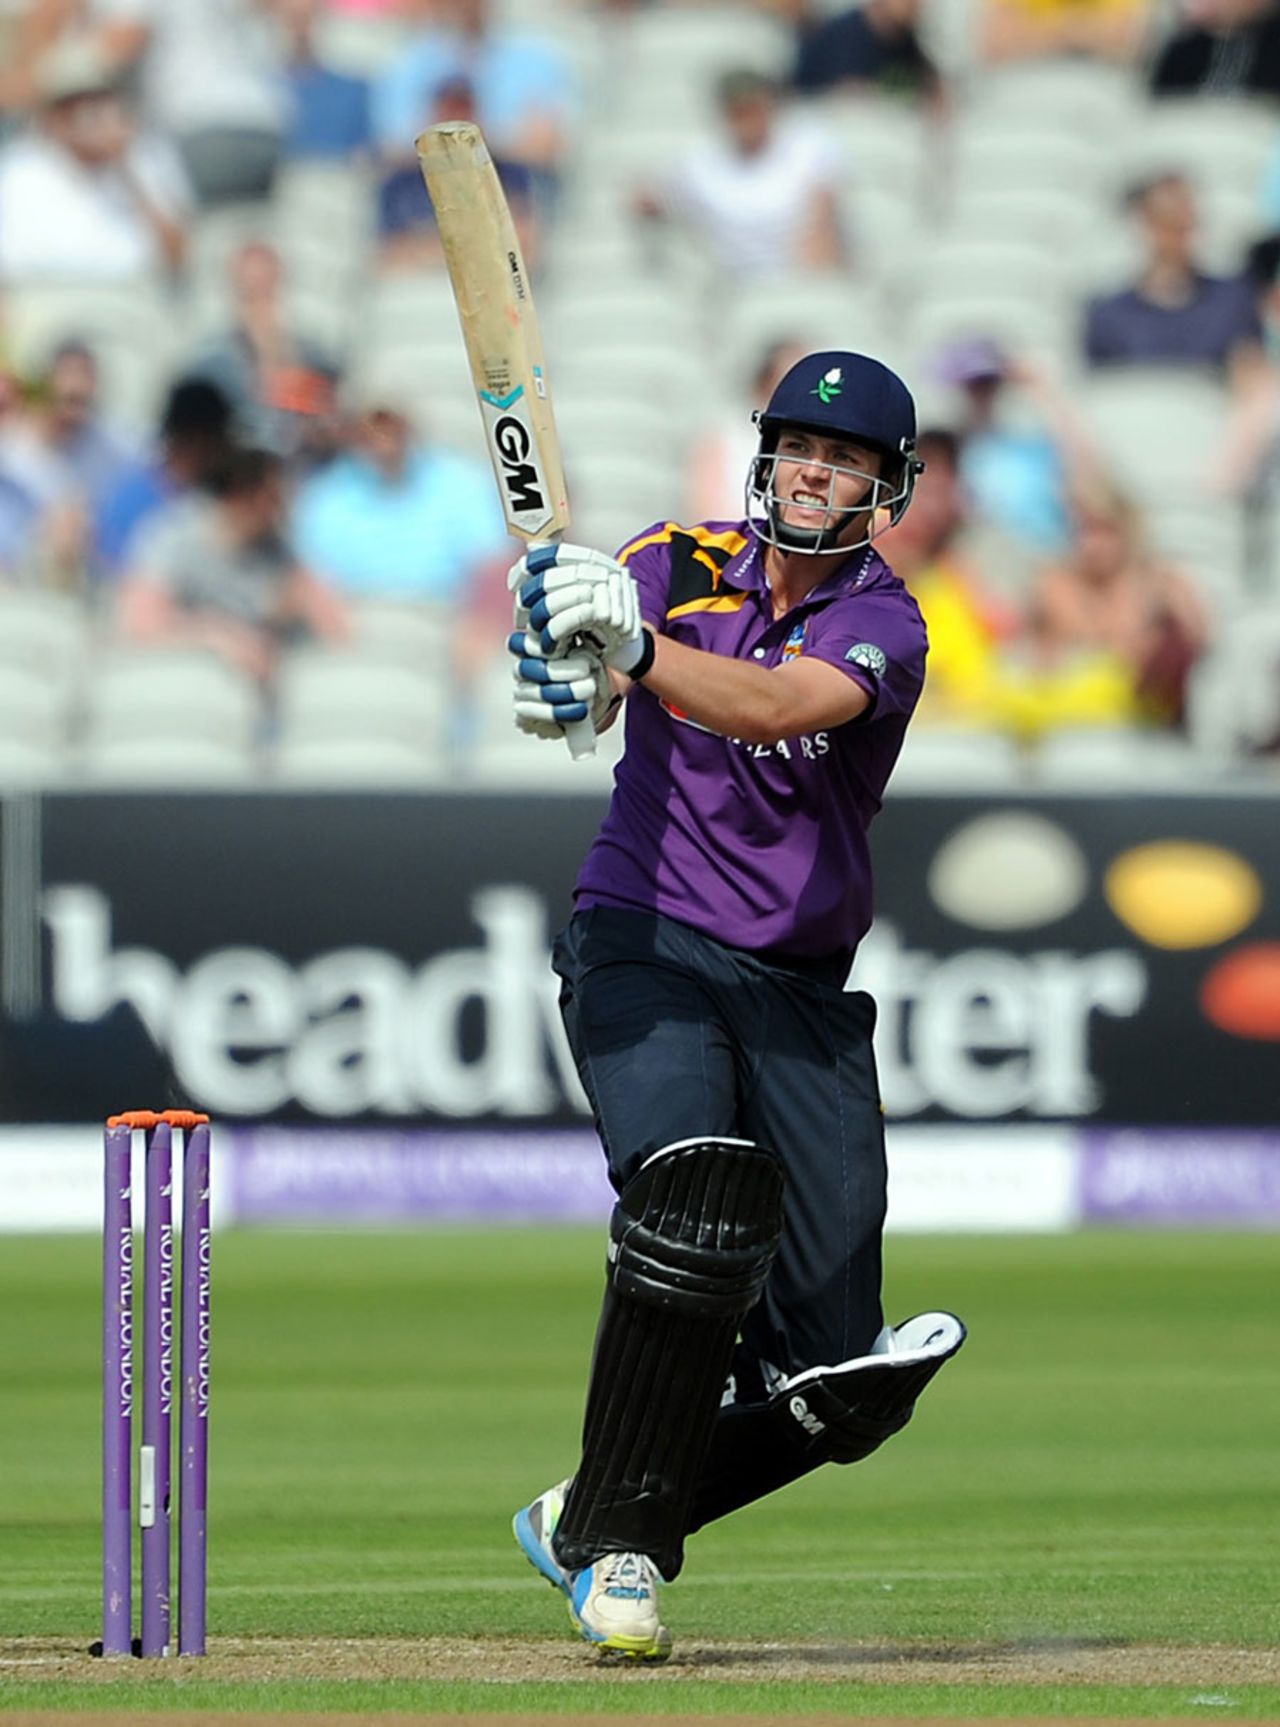 Alex Lees second top-scored for Yorkshire, Lancashire v Yorkshire, Royal London Cup, Group A, Old Trafford, July 26, 2014